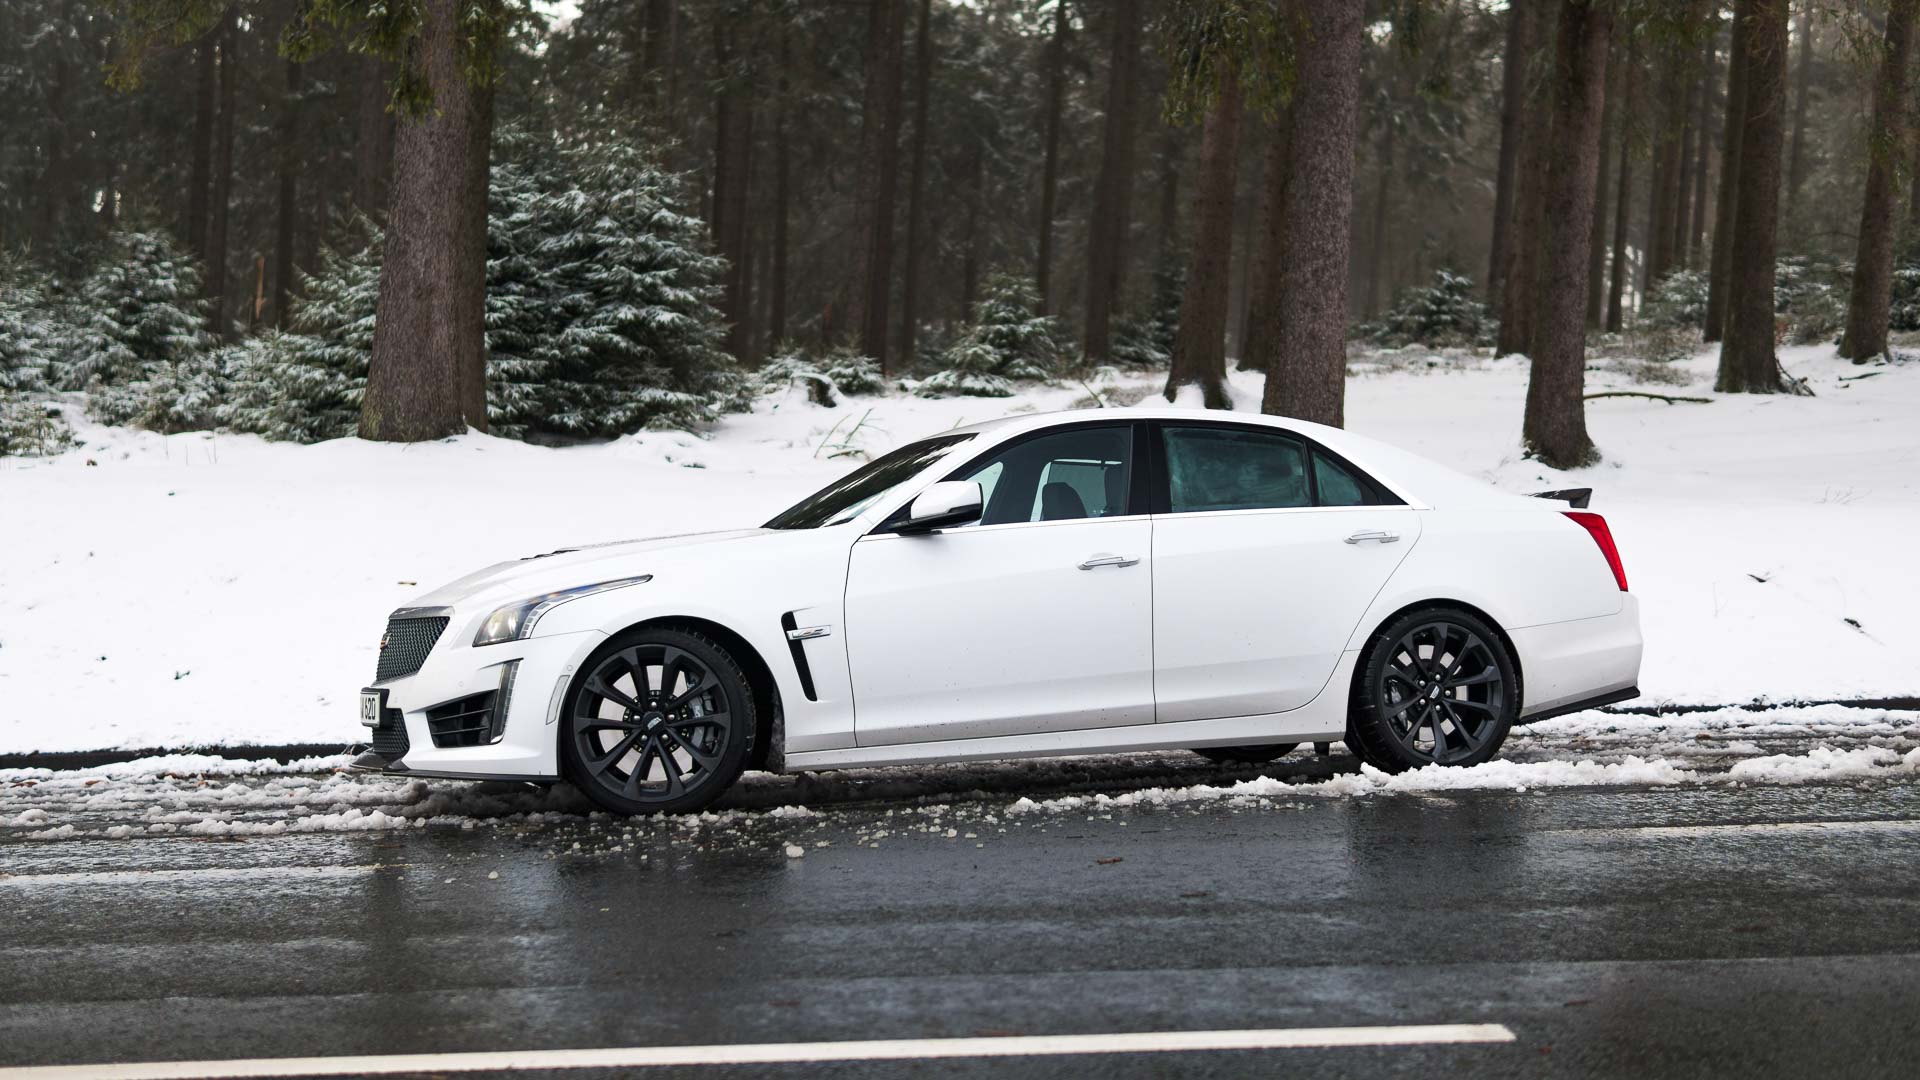 Heart and Soul: Der Cadillac CTS-V im (letzten) Test